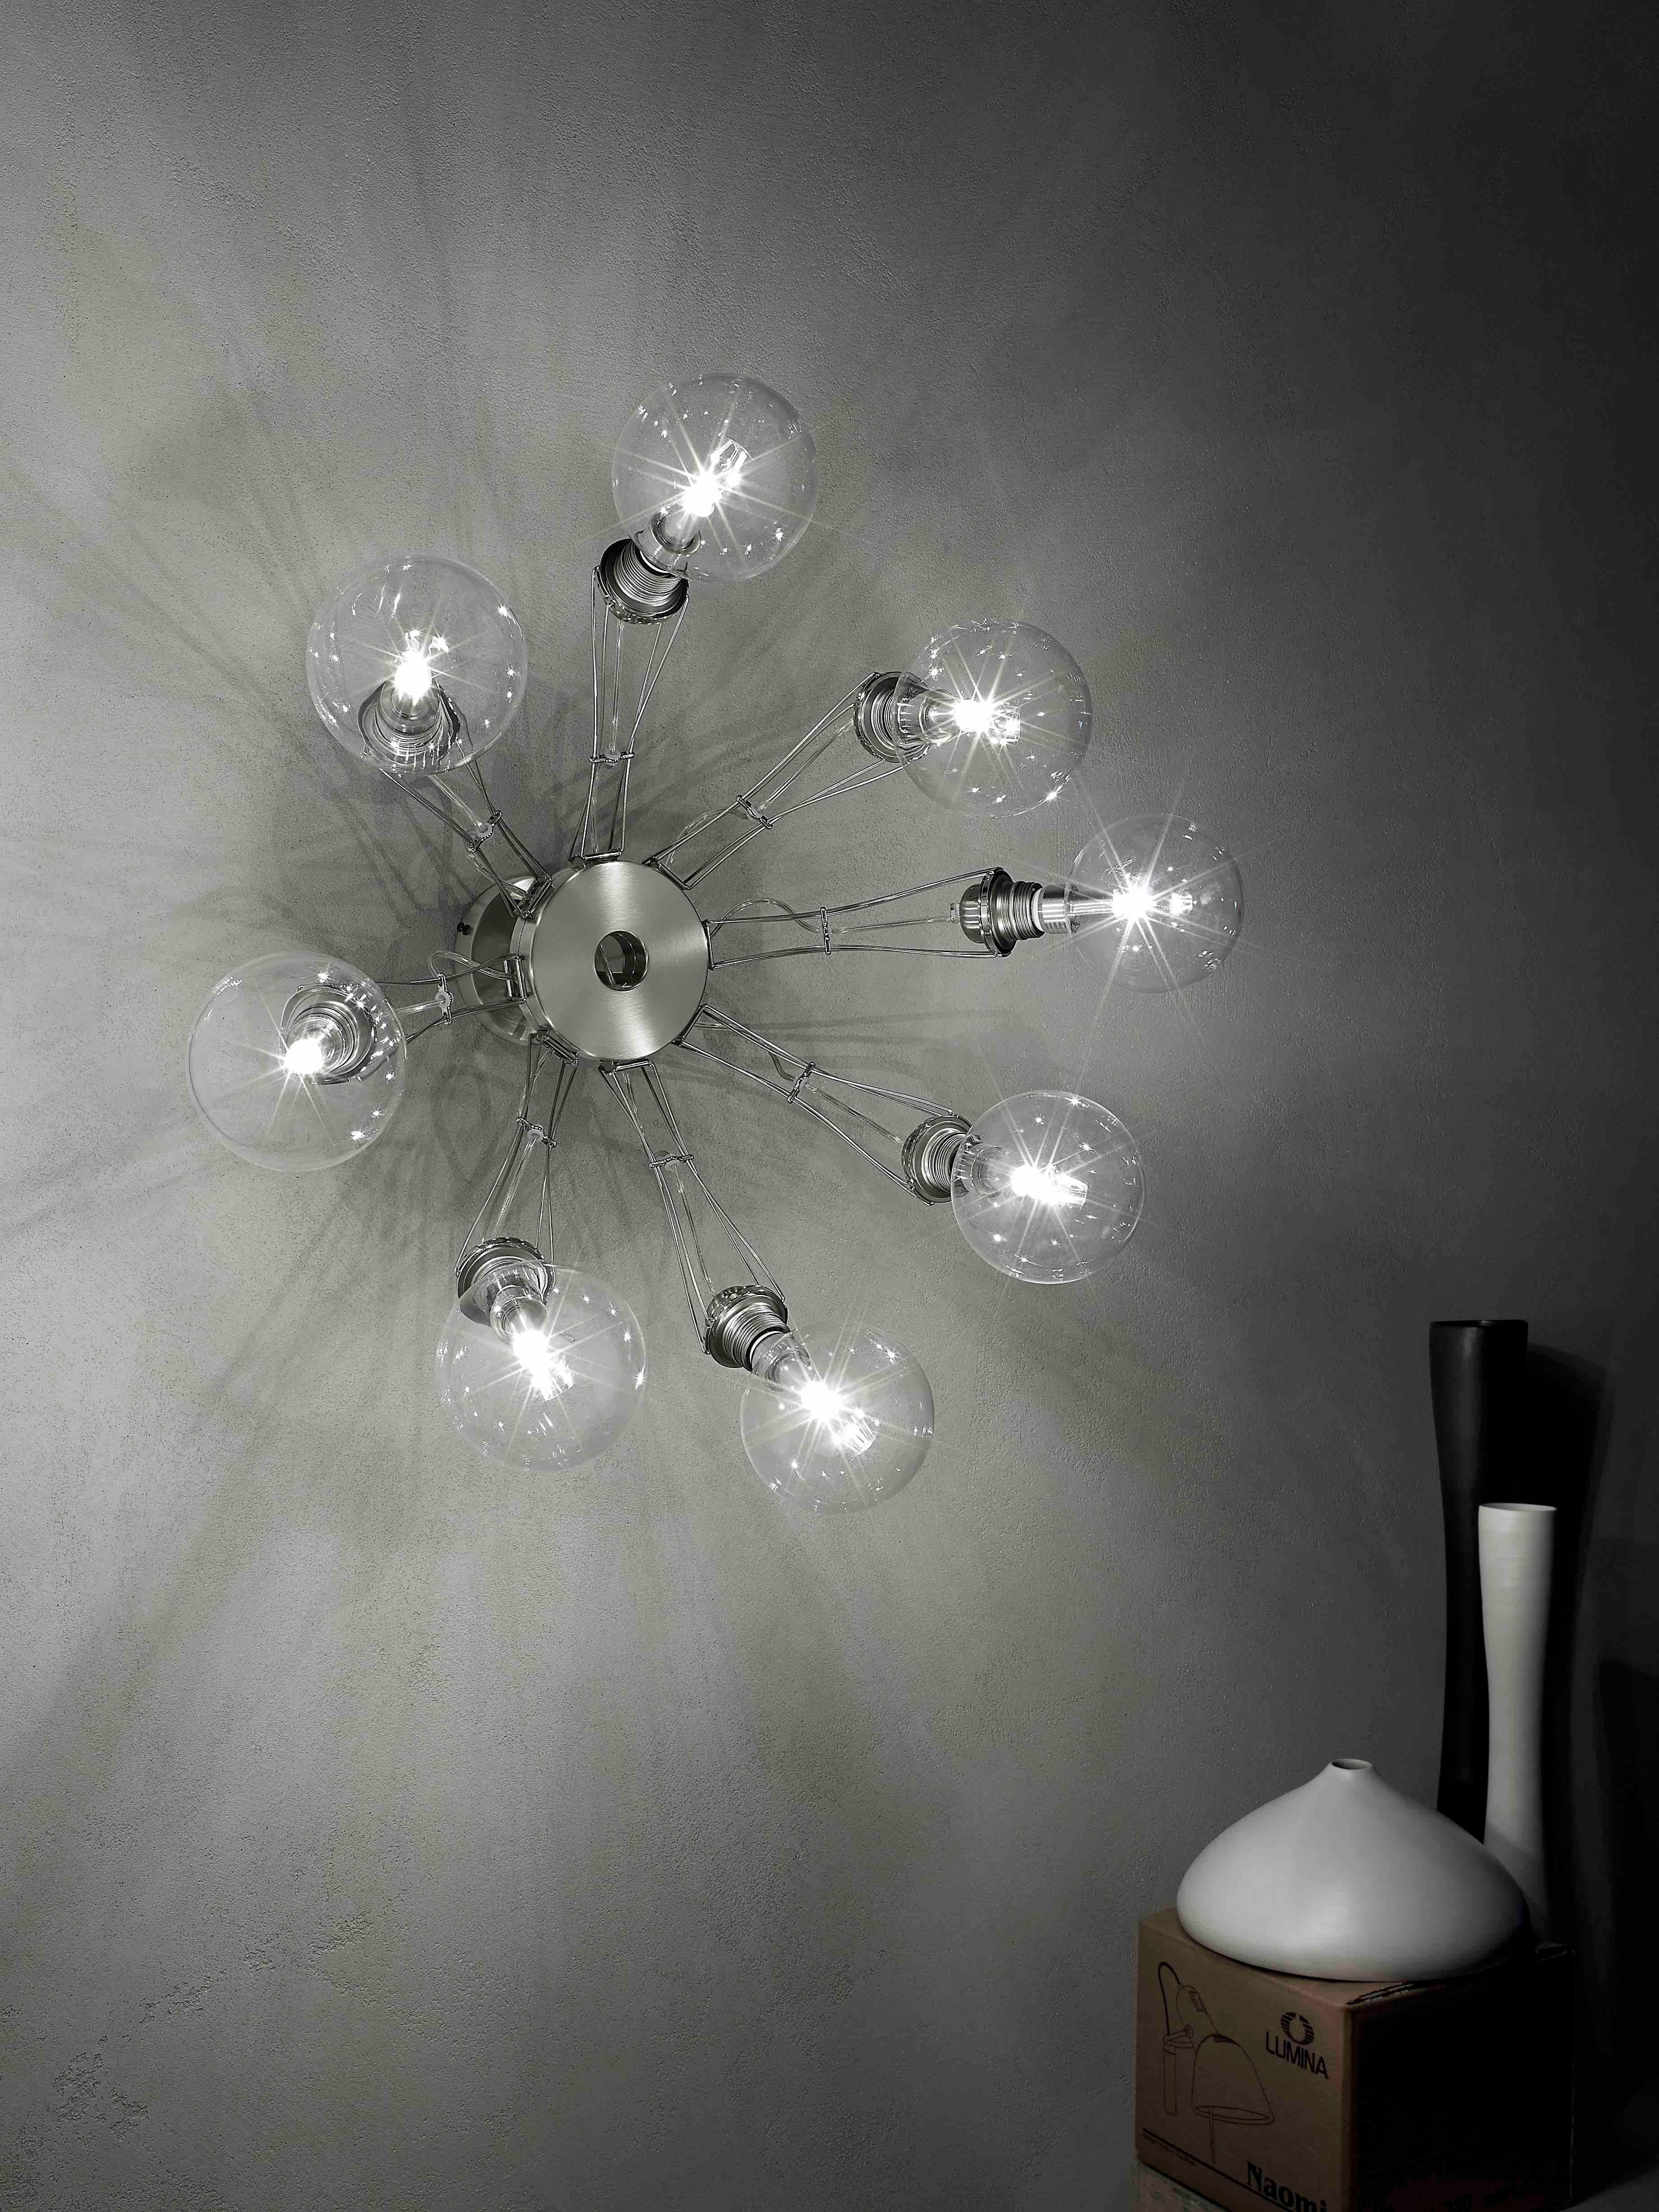 Wall-ceiling lamp in aluminium alloy and steel made of a central body with eight arms that can be moved perpendicularly to the body; halogen or fluorescent compact bulbs can be used within the maximum admitted power.
bulbs not